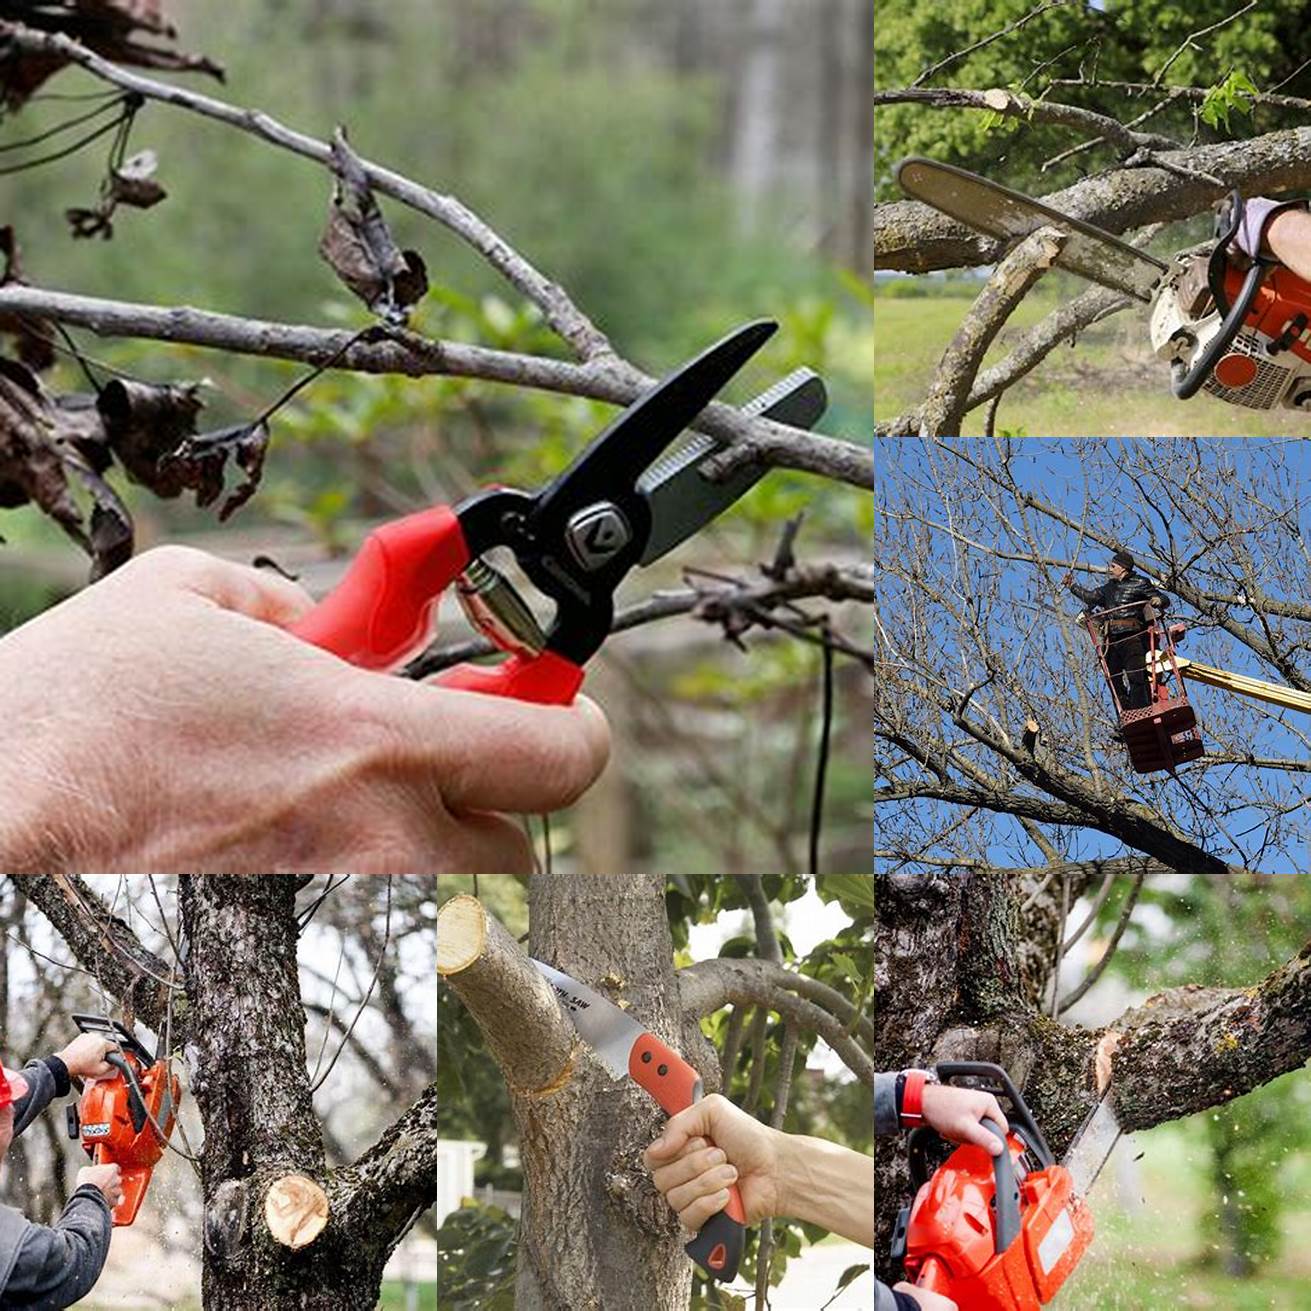 Trim trees and remove dead branches